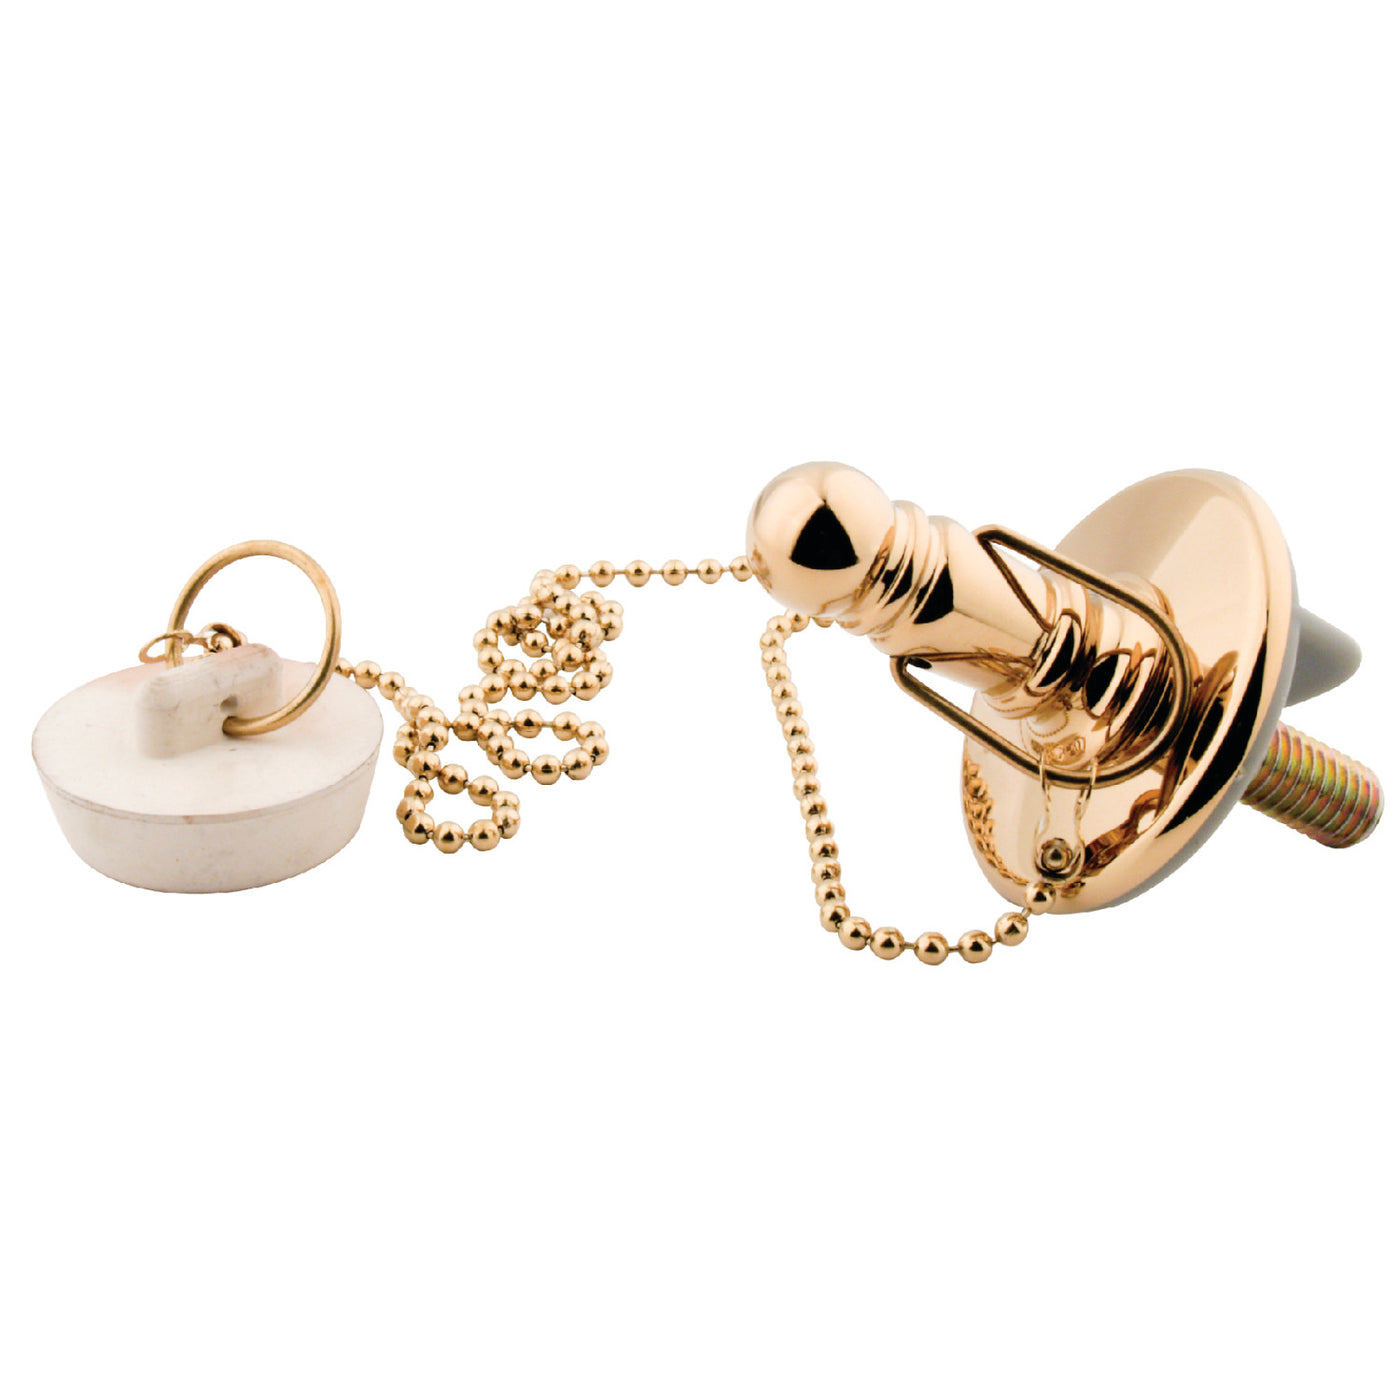 Elements of Design ED1112 Rubber Stopper Chain and Attachment for CC1002, Polished Brass